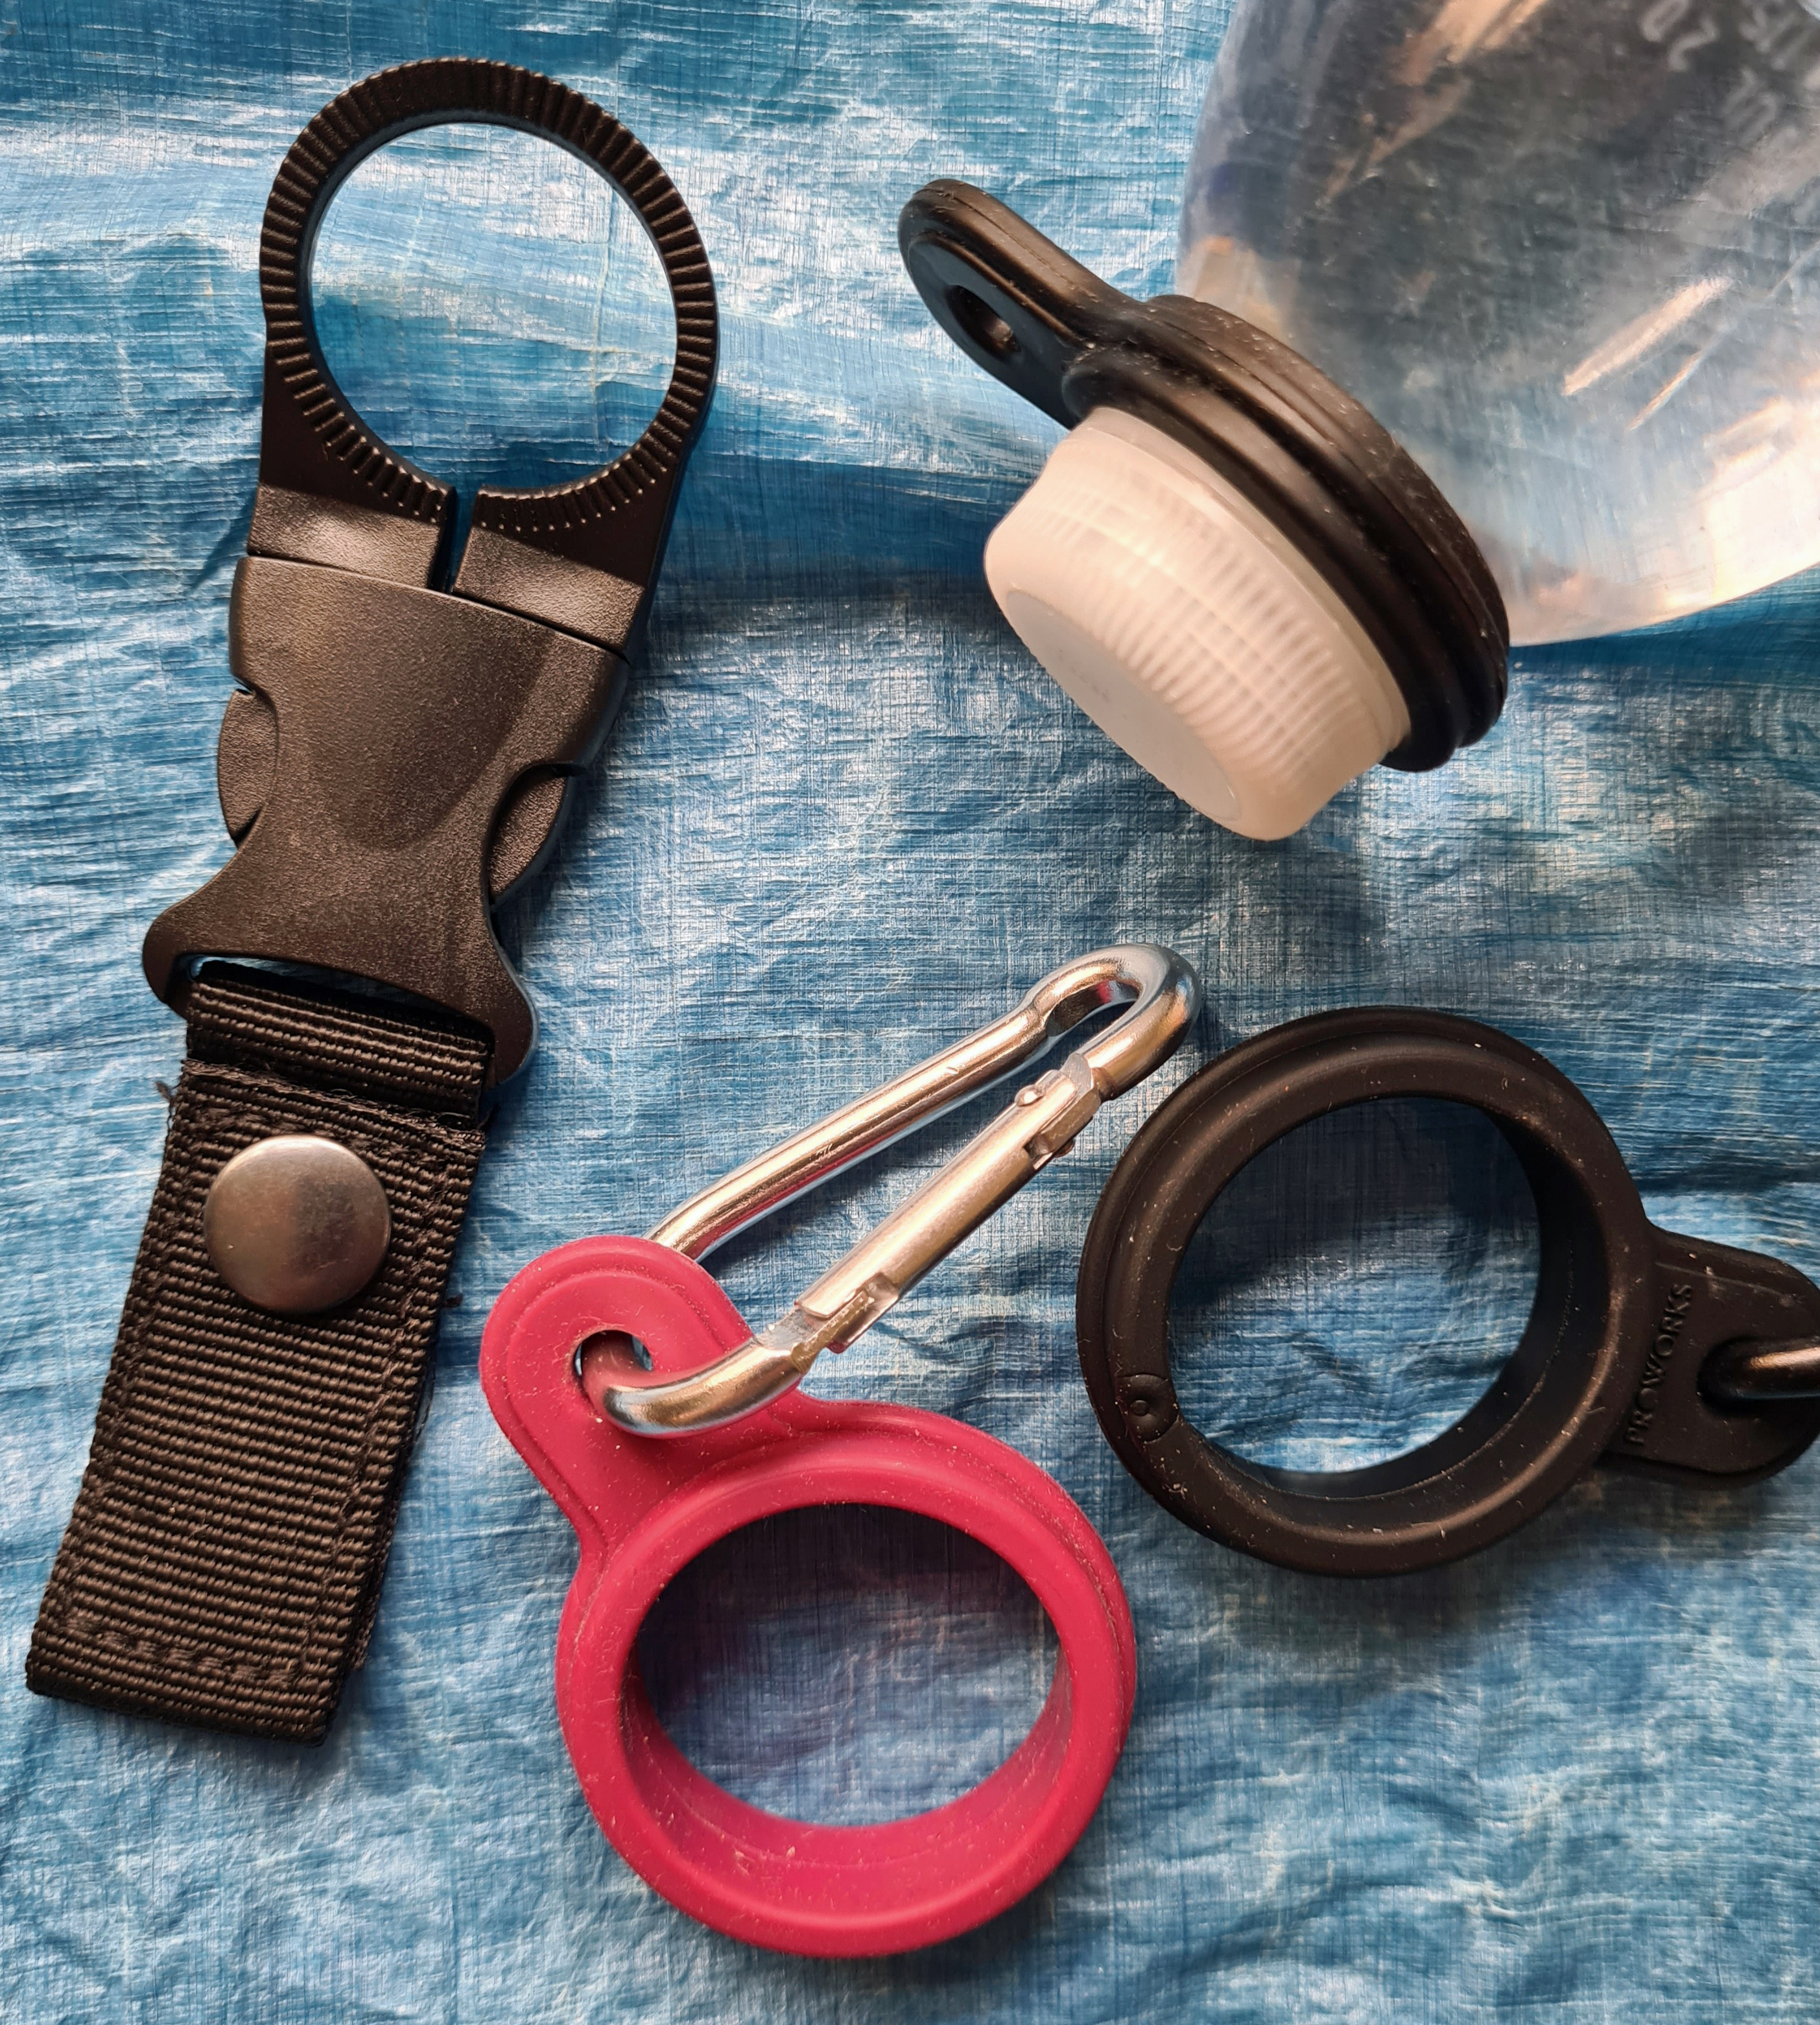 Gear talk: DIY bottle hangers – Three Points of the Compass